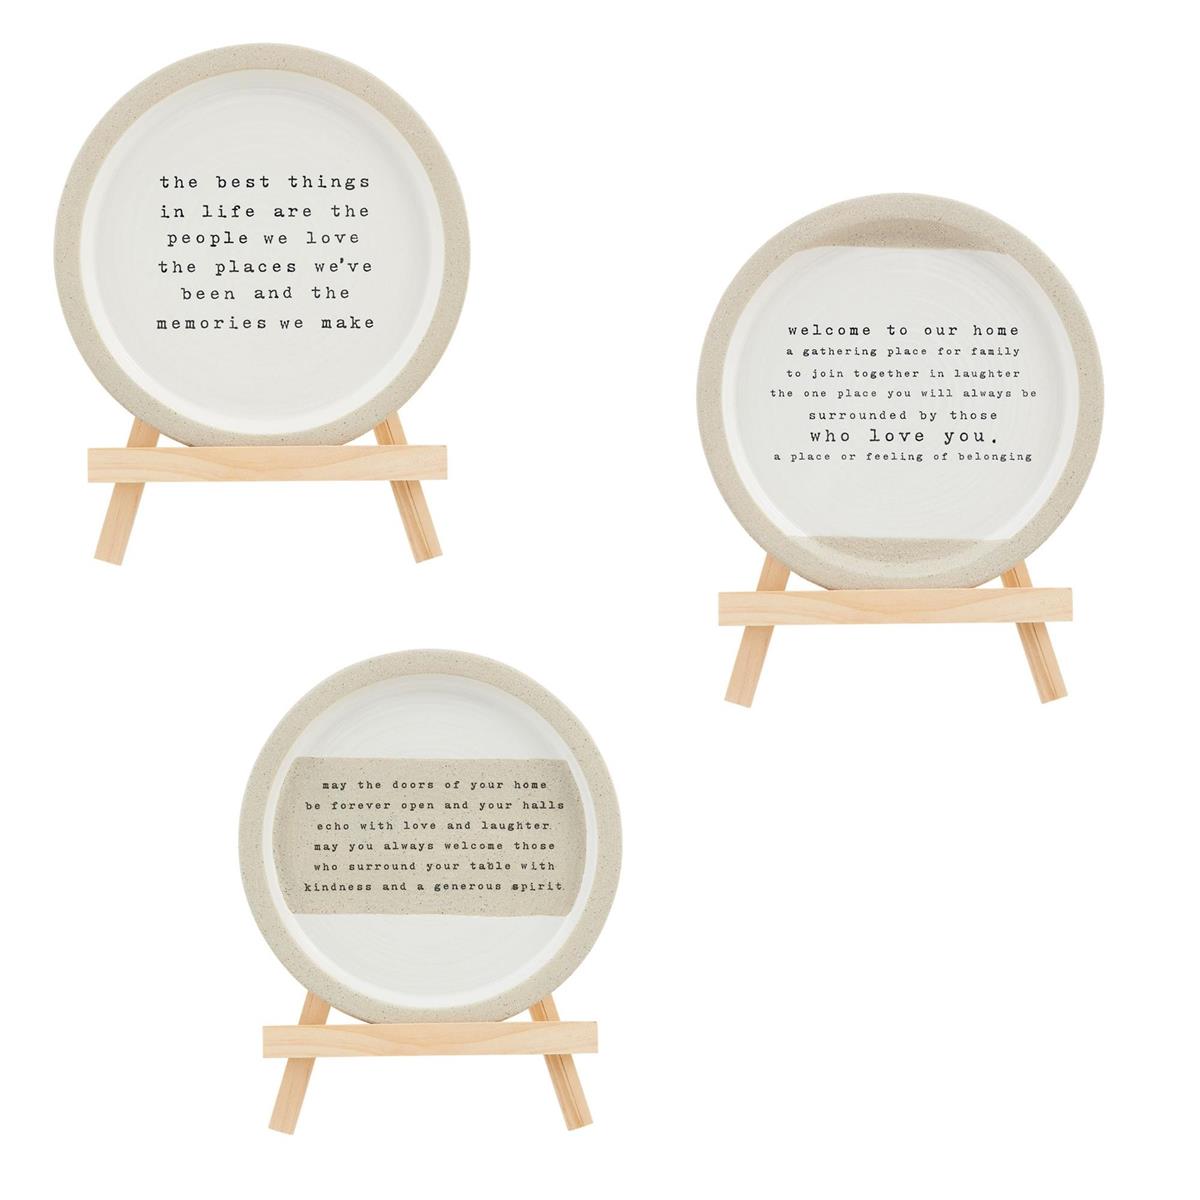 3 styles of sentiment plates on easels arranged on a white background.